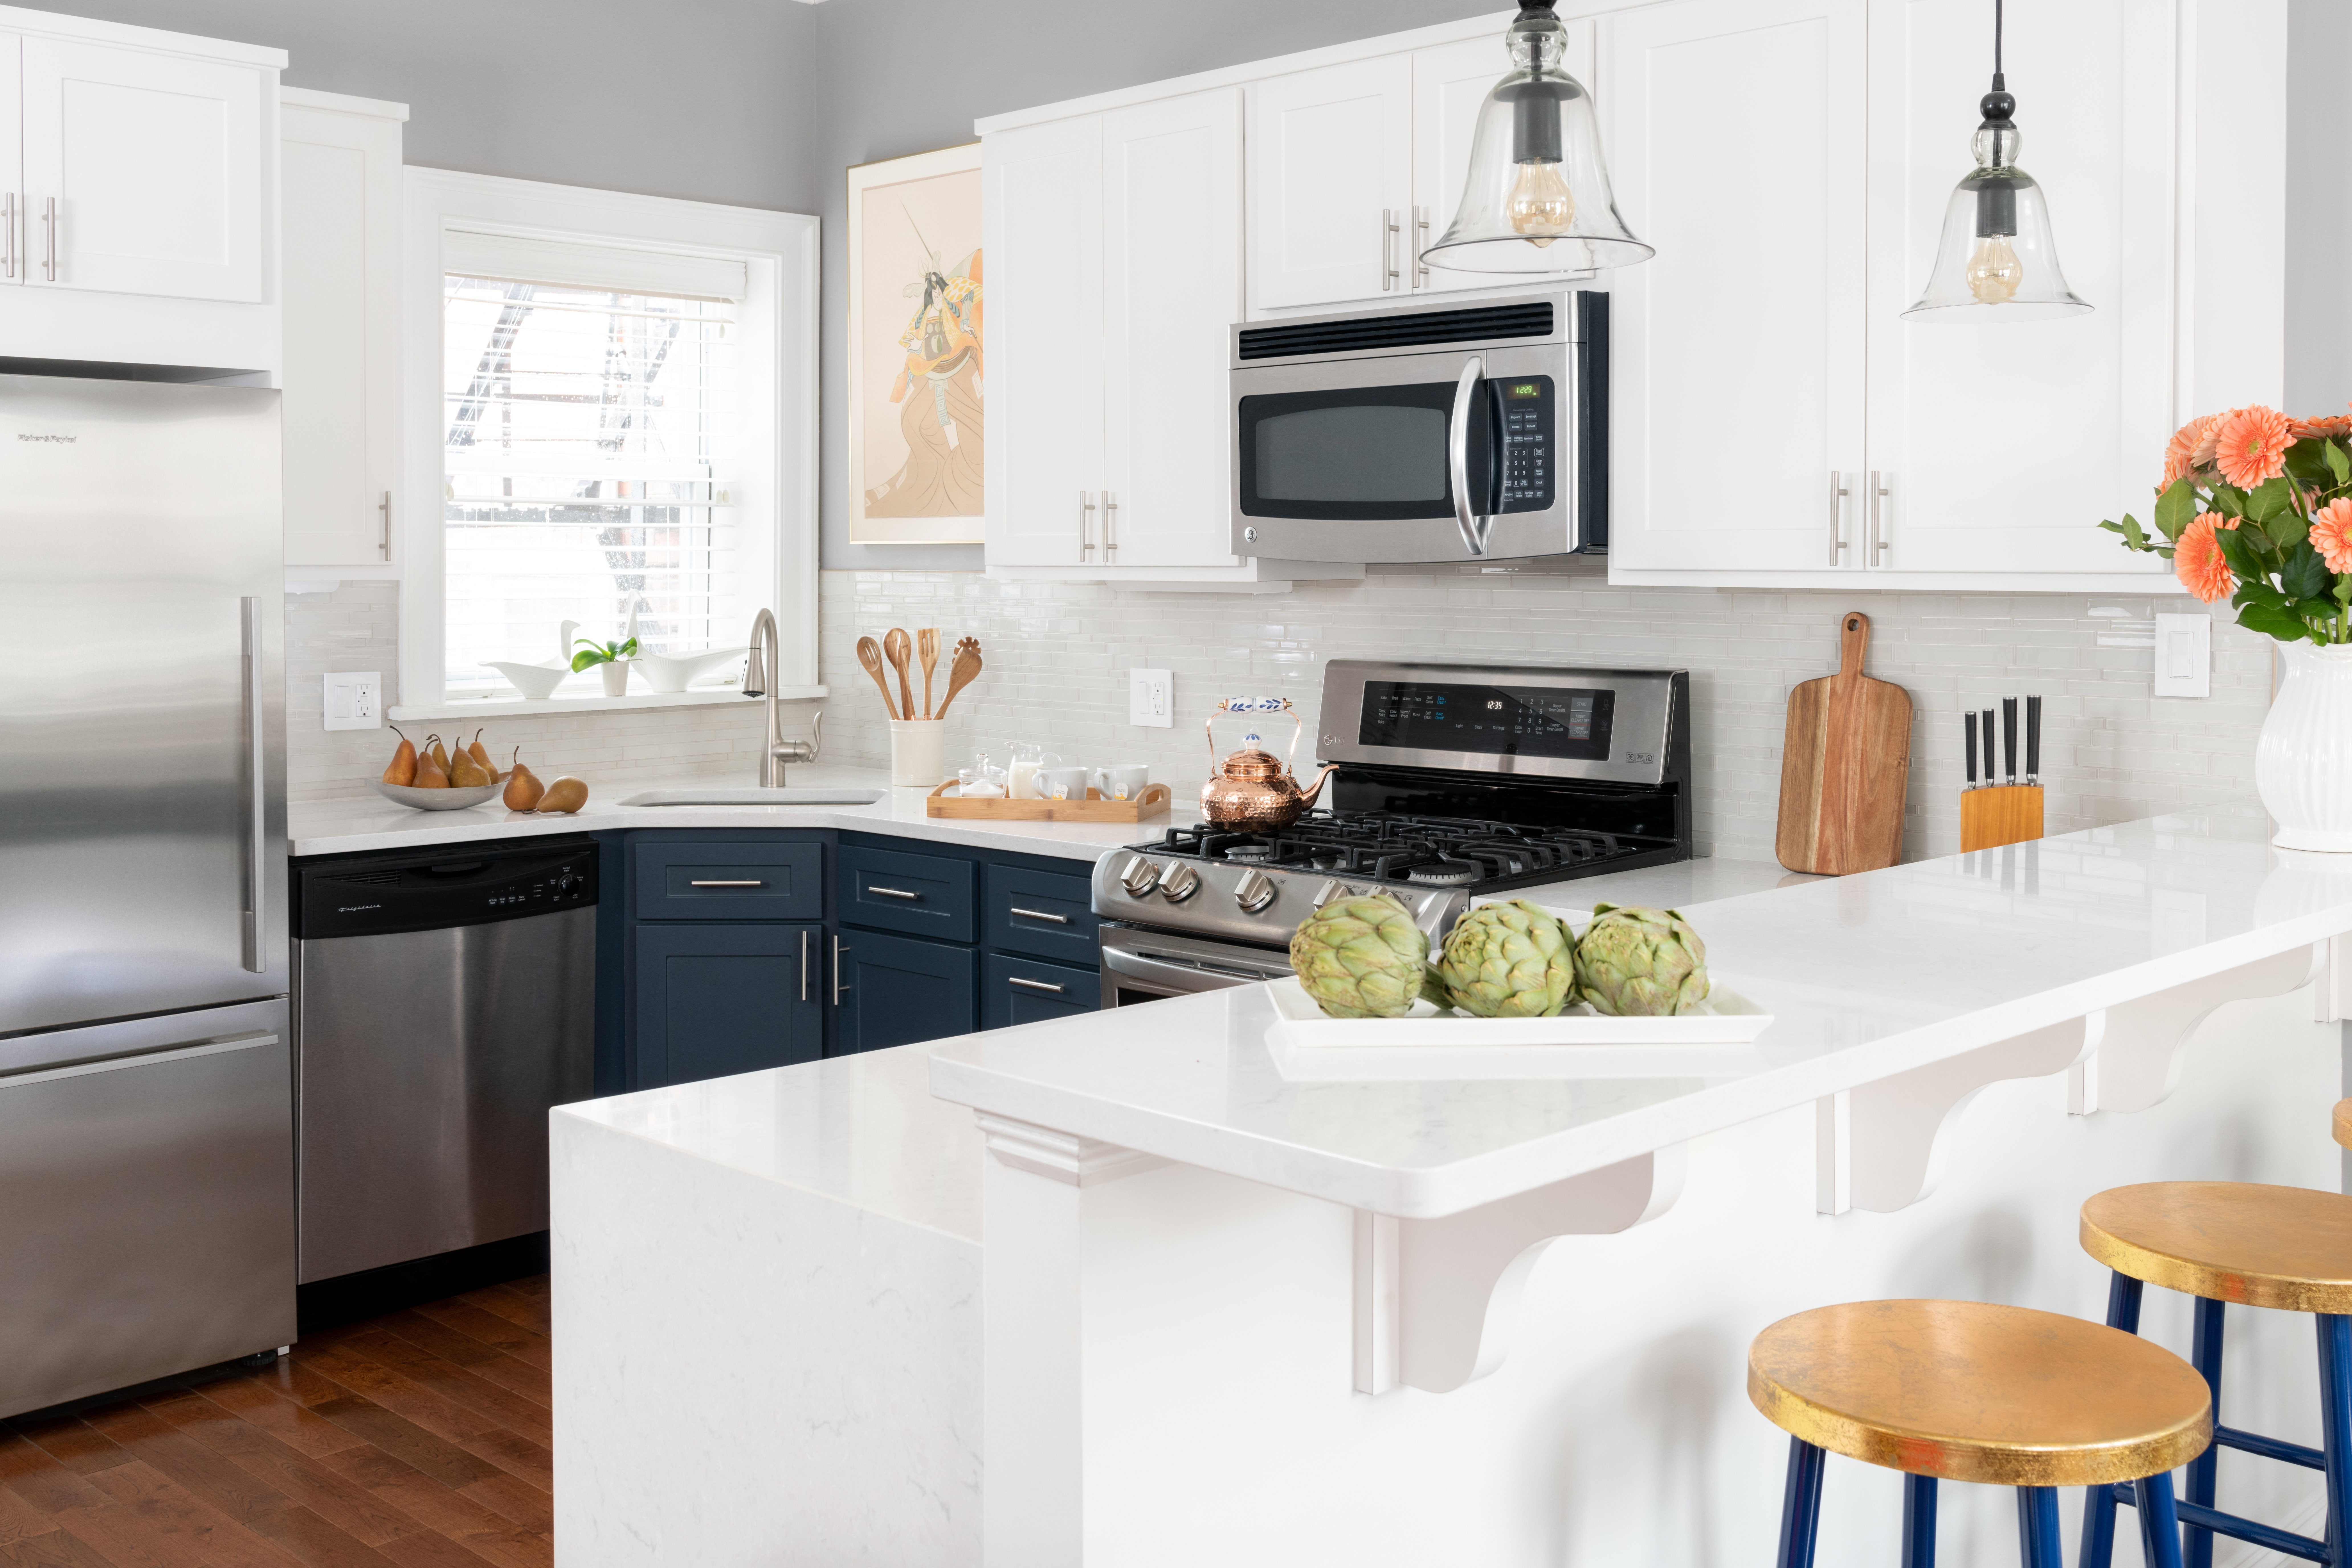 Which Paint Colors Look Best With White Cabinets